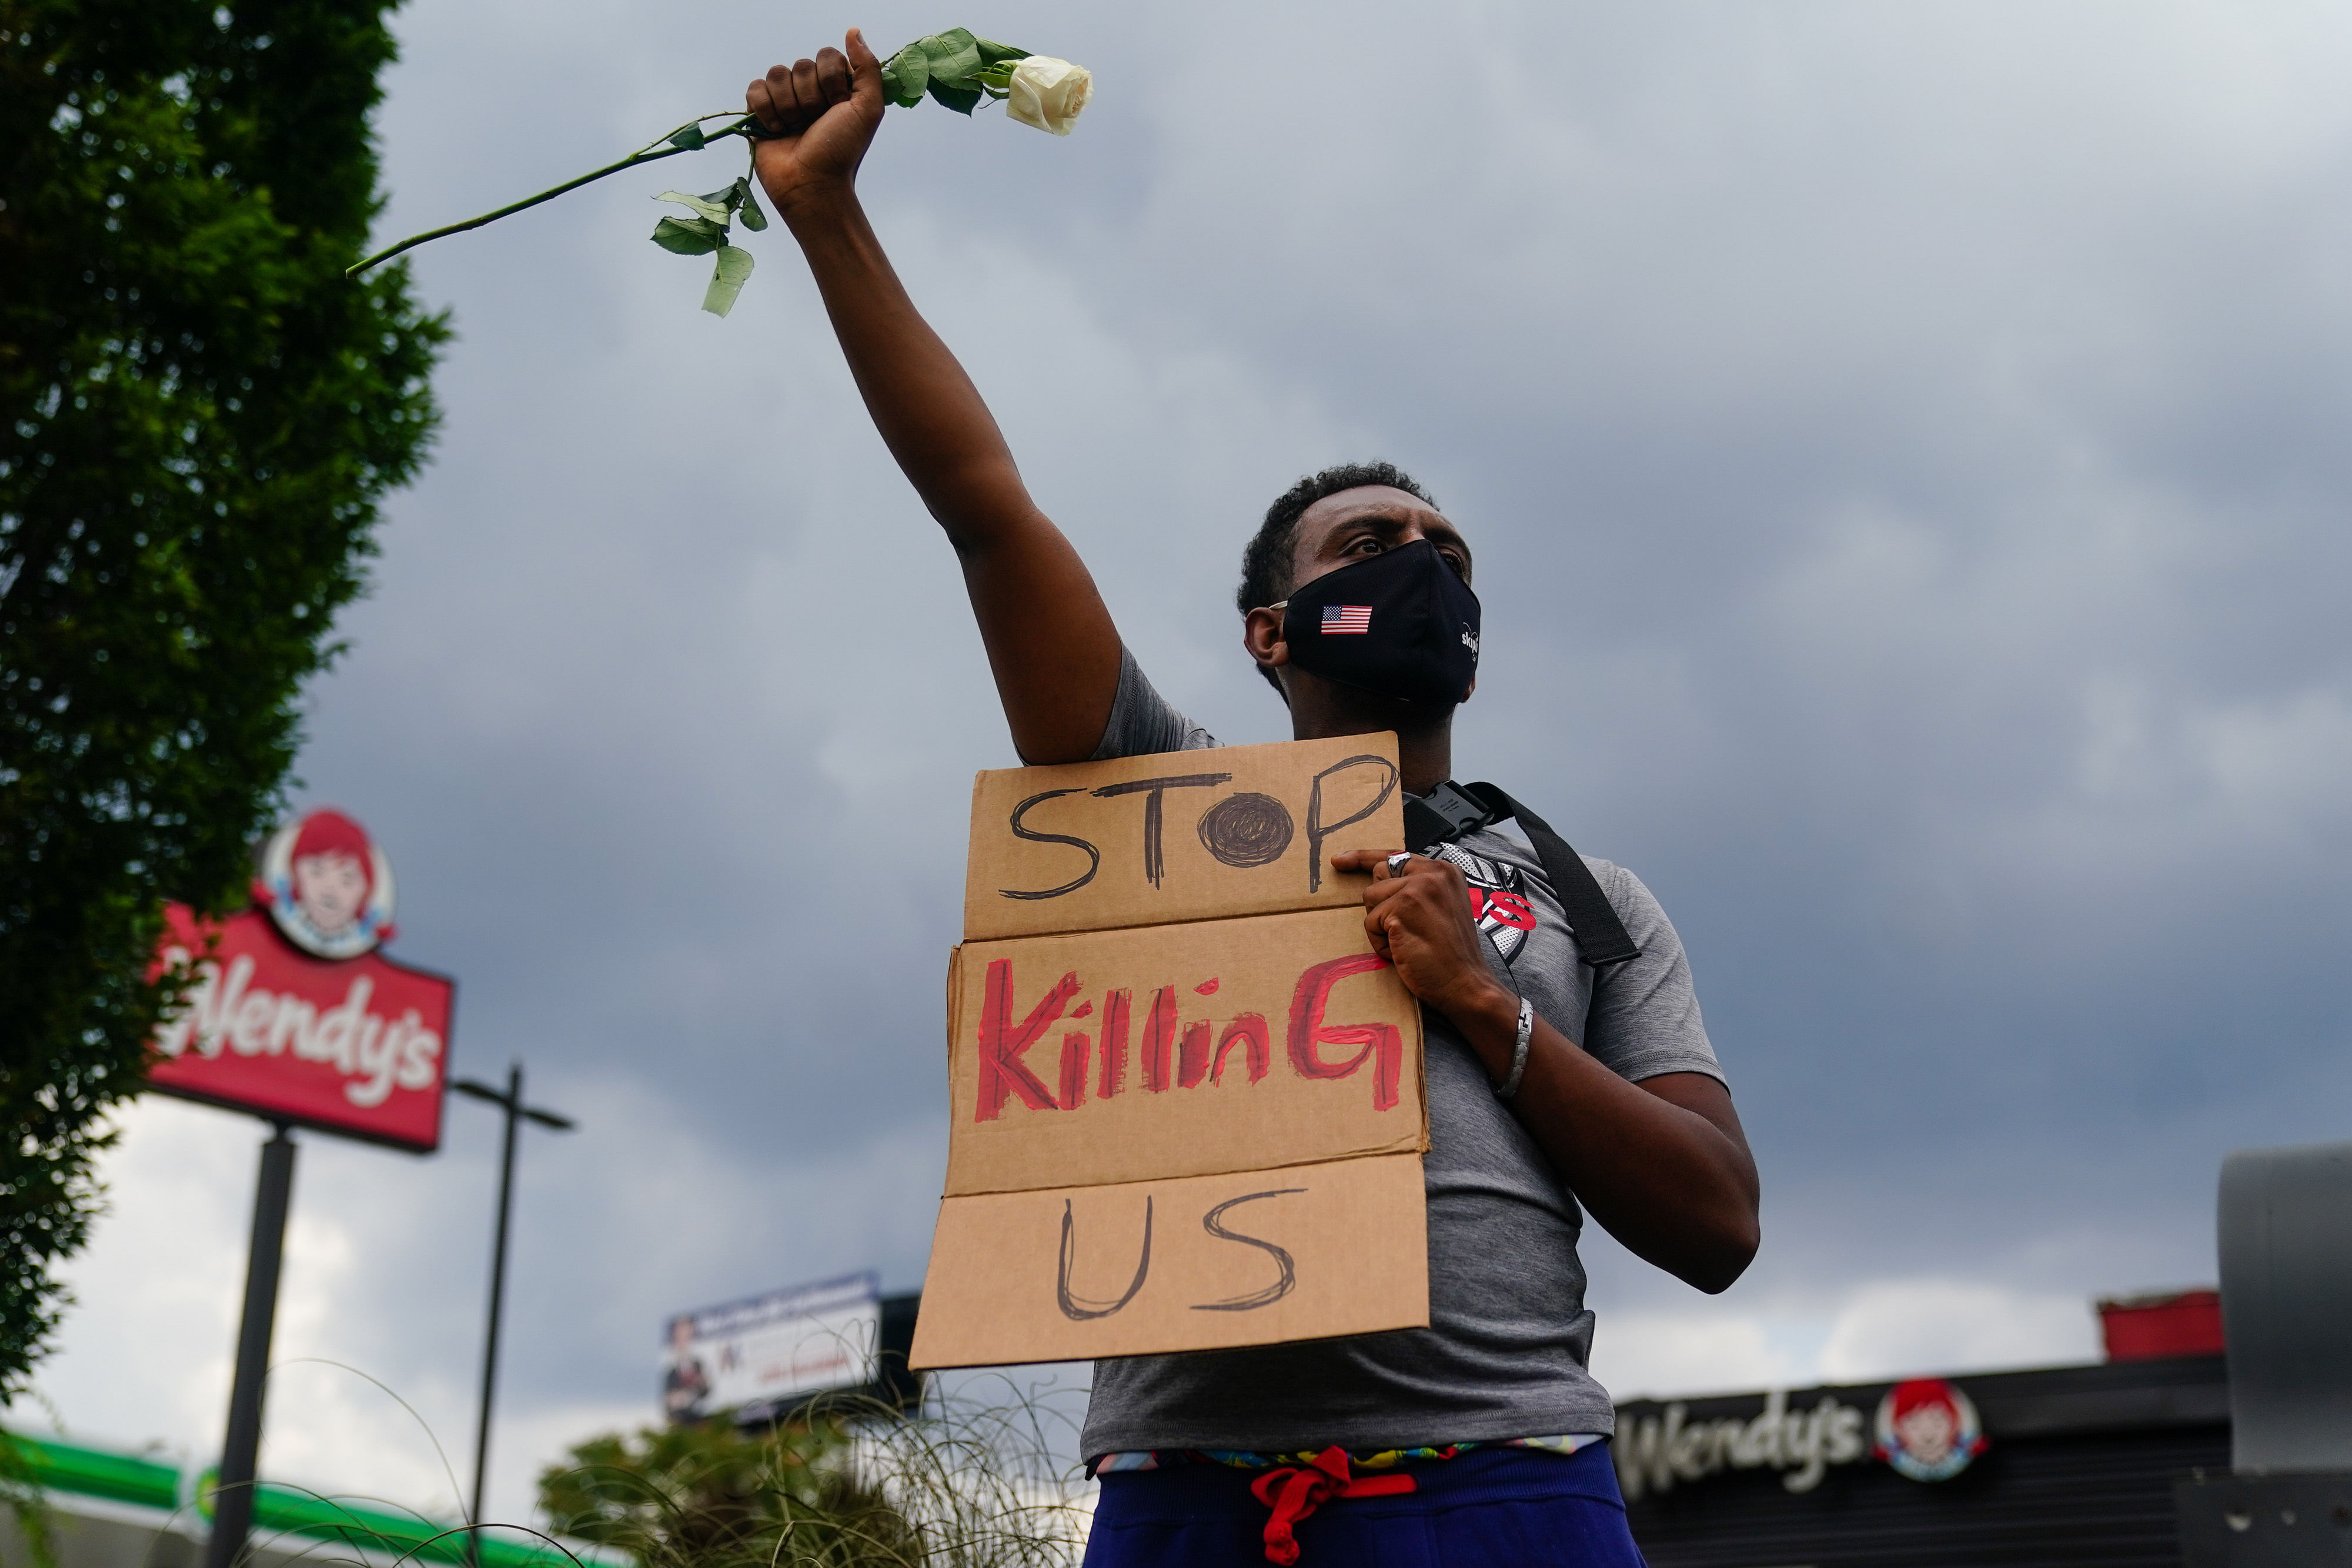 A man holds a sign and a white rose in his fist while facing traffic outside a burned Wendy’s restaurant on the second day following the police shooting death of Rayshard Brooks in the restaurant parking lot June 14, 2020, in Atlanta, Georgia. - The fatal shooting of a black man by a white police officer, this time in Atlanta, Georgia, poured more fuel June 14, 2020 on a raging US debate over racism after another round of street protests and the resignation of the city's police chief. A Wendy's restaurant where 27-year-old Rayshard Brooks was killed was set on fire June 13, 2020 and hundreds of people marched to protest the killing. (Photo by AFP)